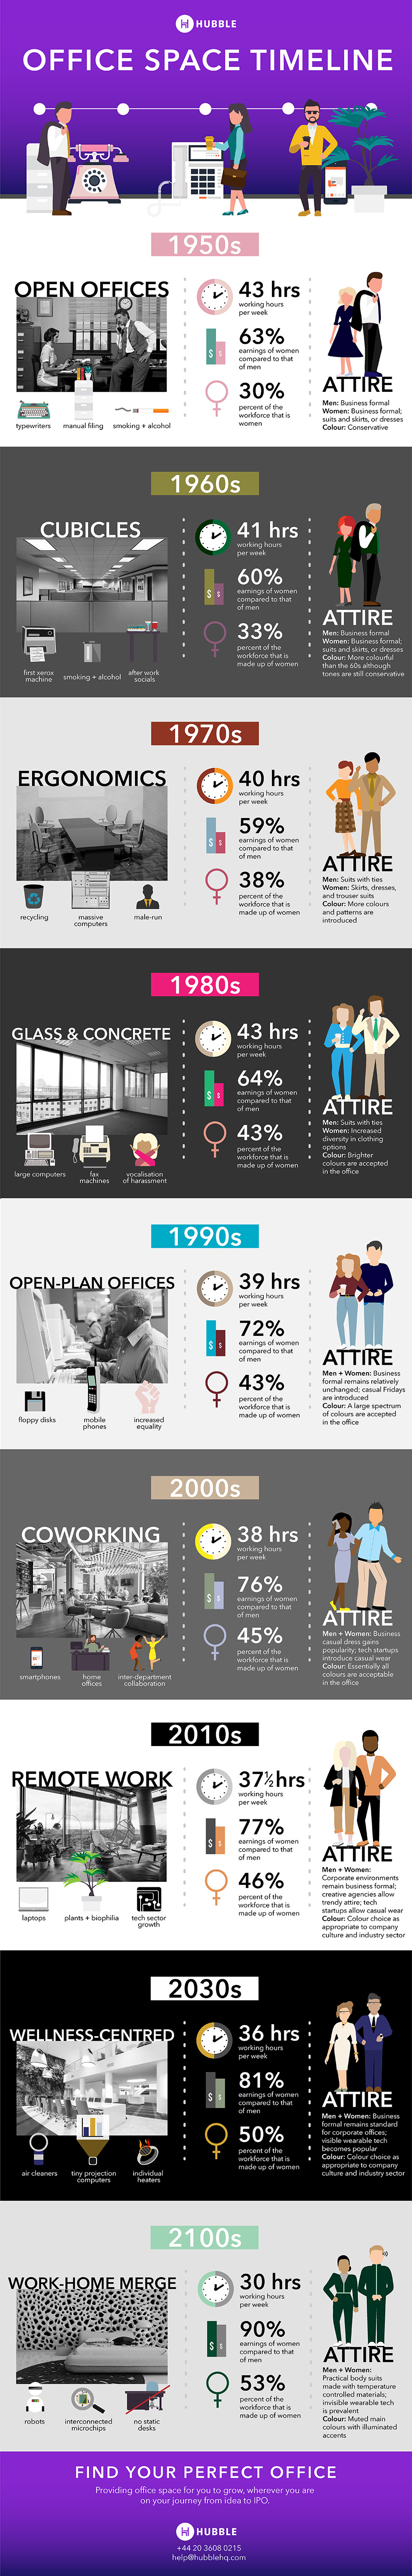 office space timeline infographic 1950s to 2100s.